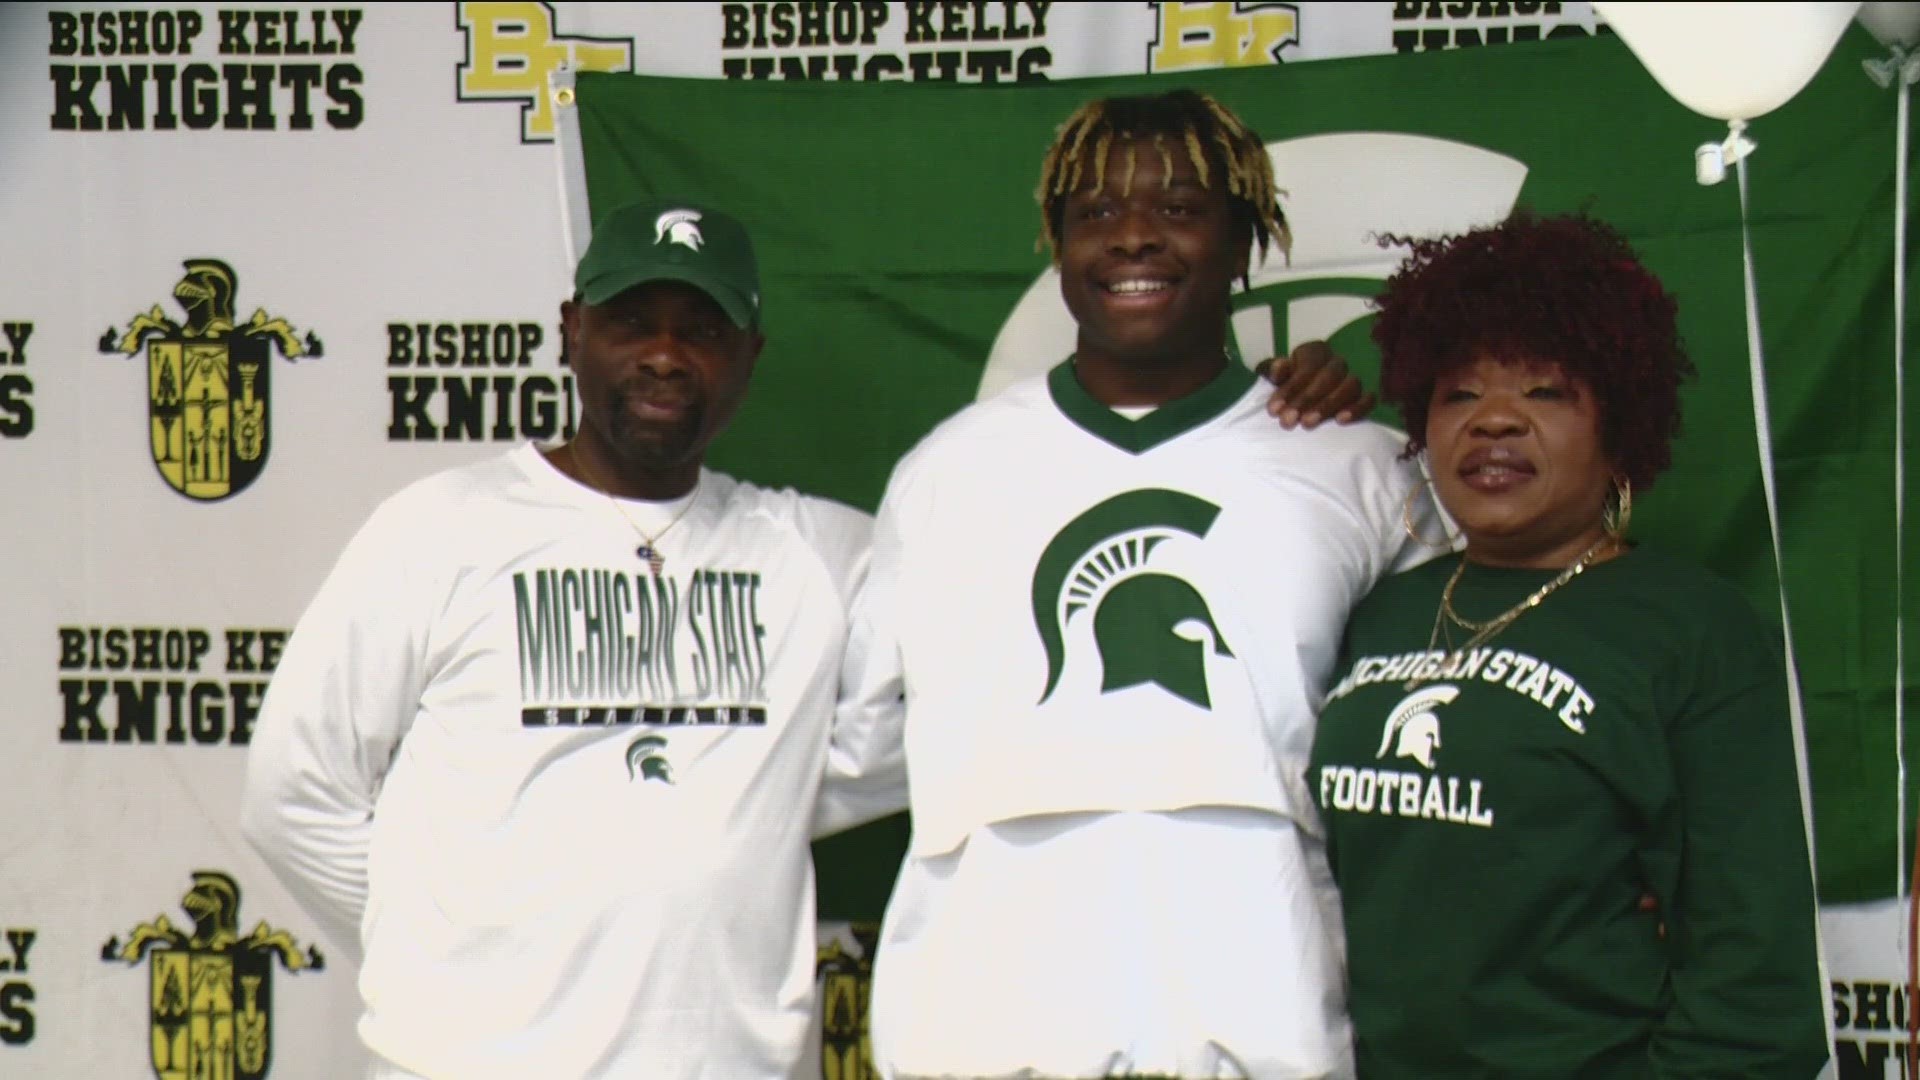 Johnson, the second-ranked prospect in Idaho, became the first player from Bishop Kelly High School to ever sign with a Big Ten team on Wednesday.